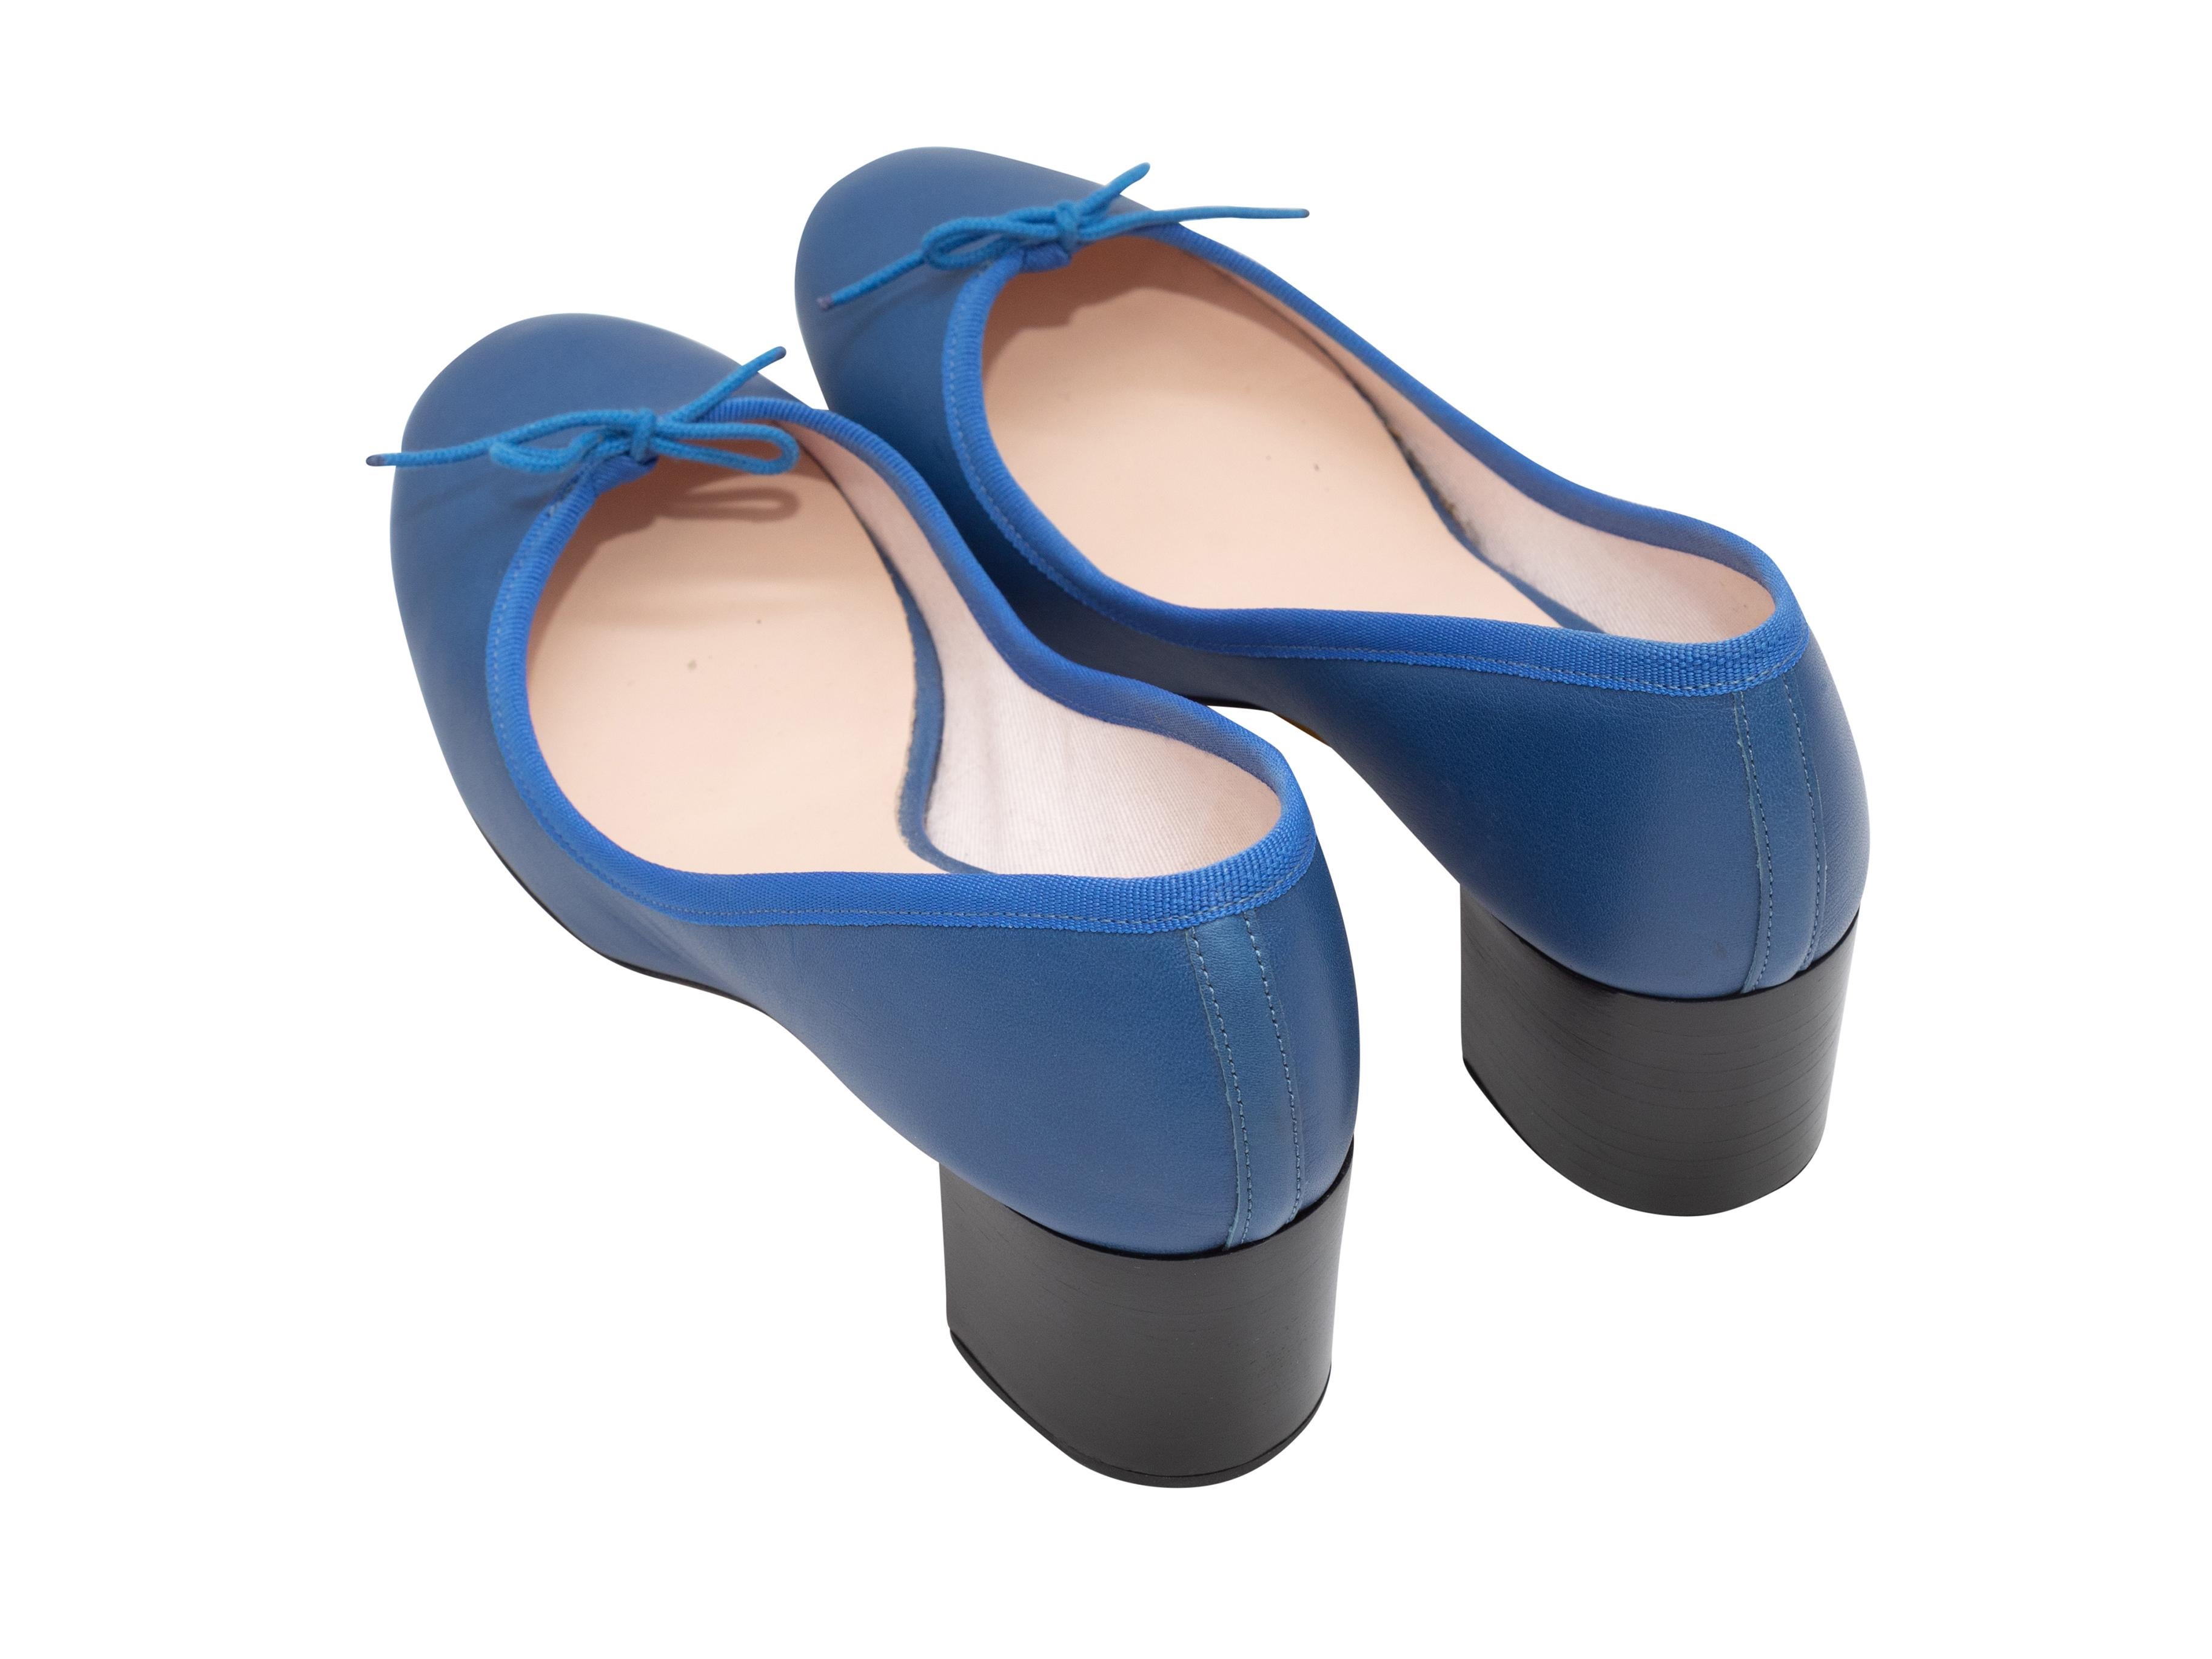 Product Details: Blue leather ballet pumps by Repetto. Bow accents at toes. Stacked block heels. 2